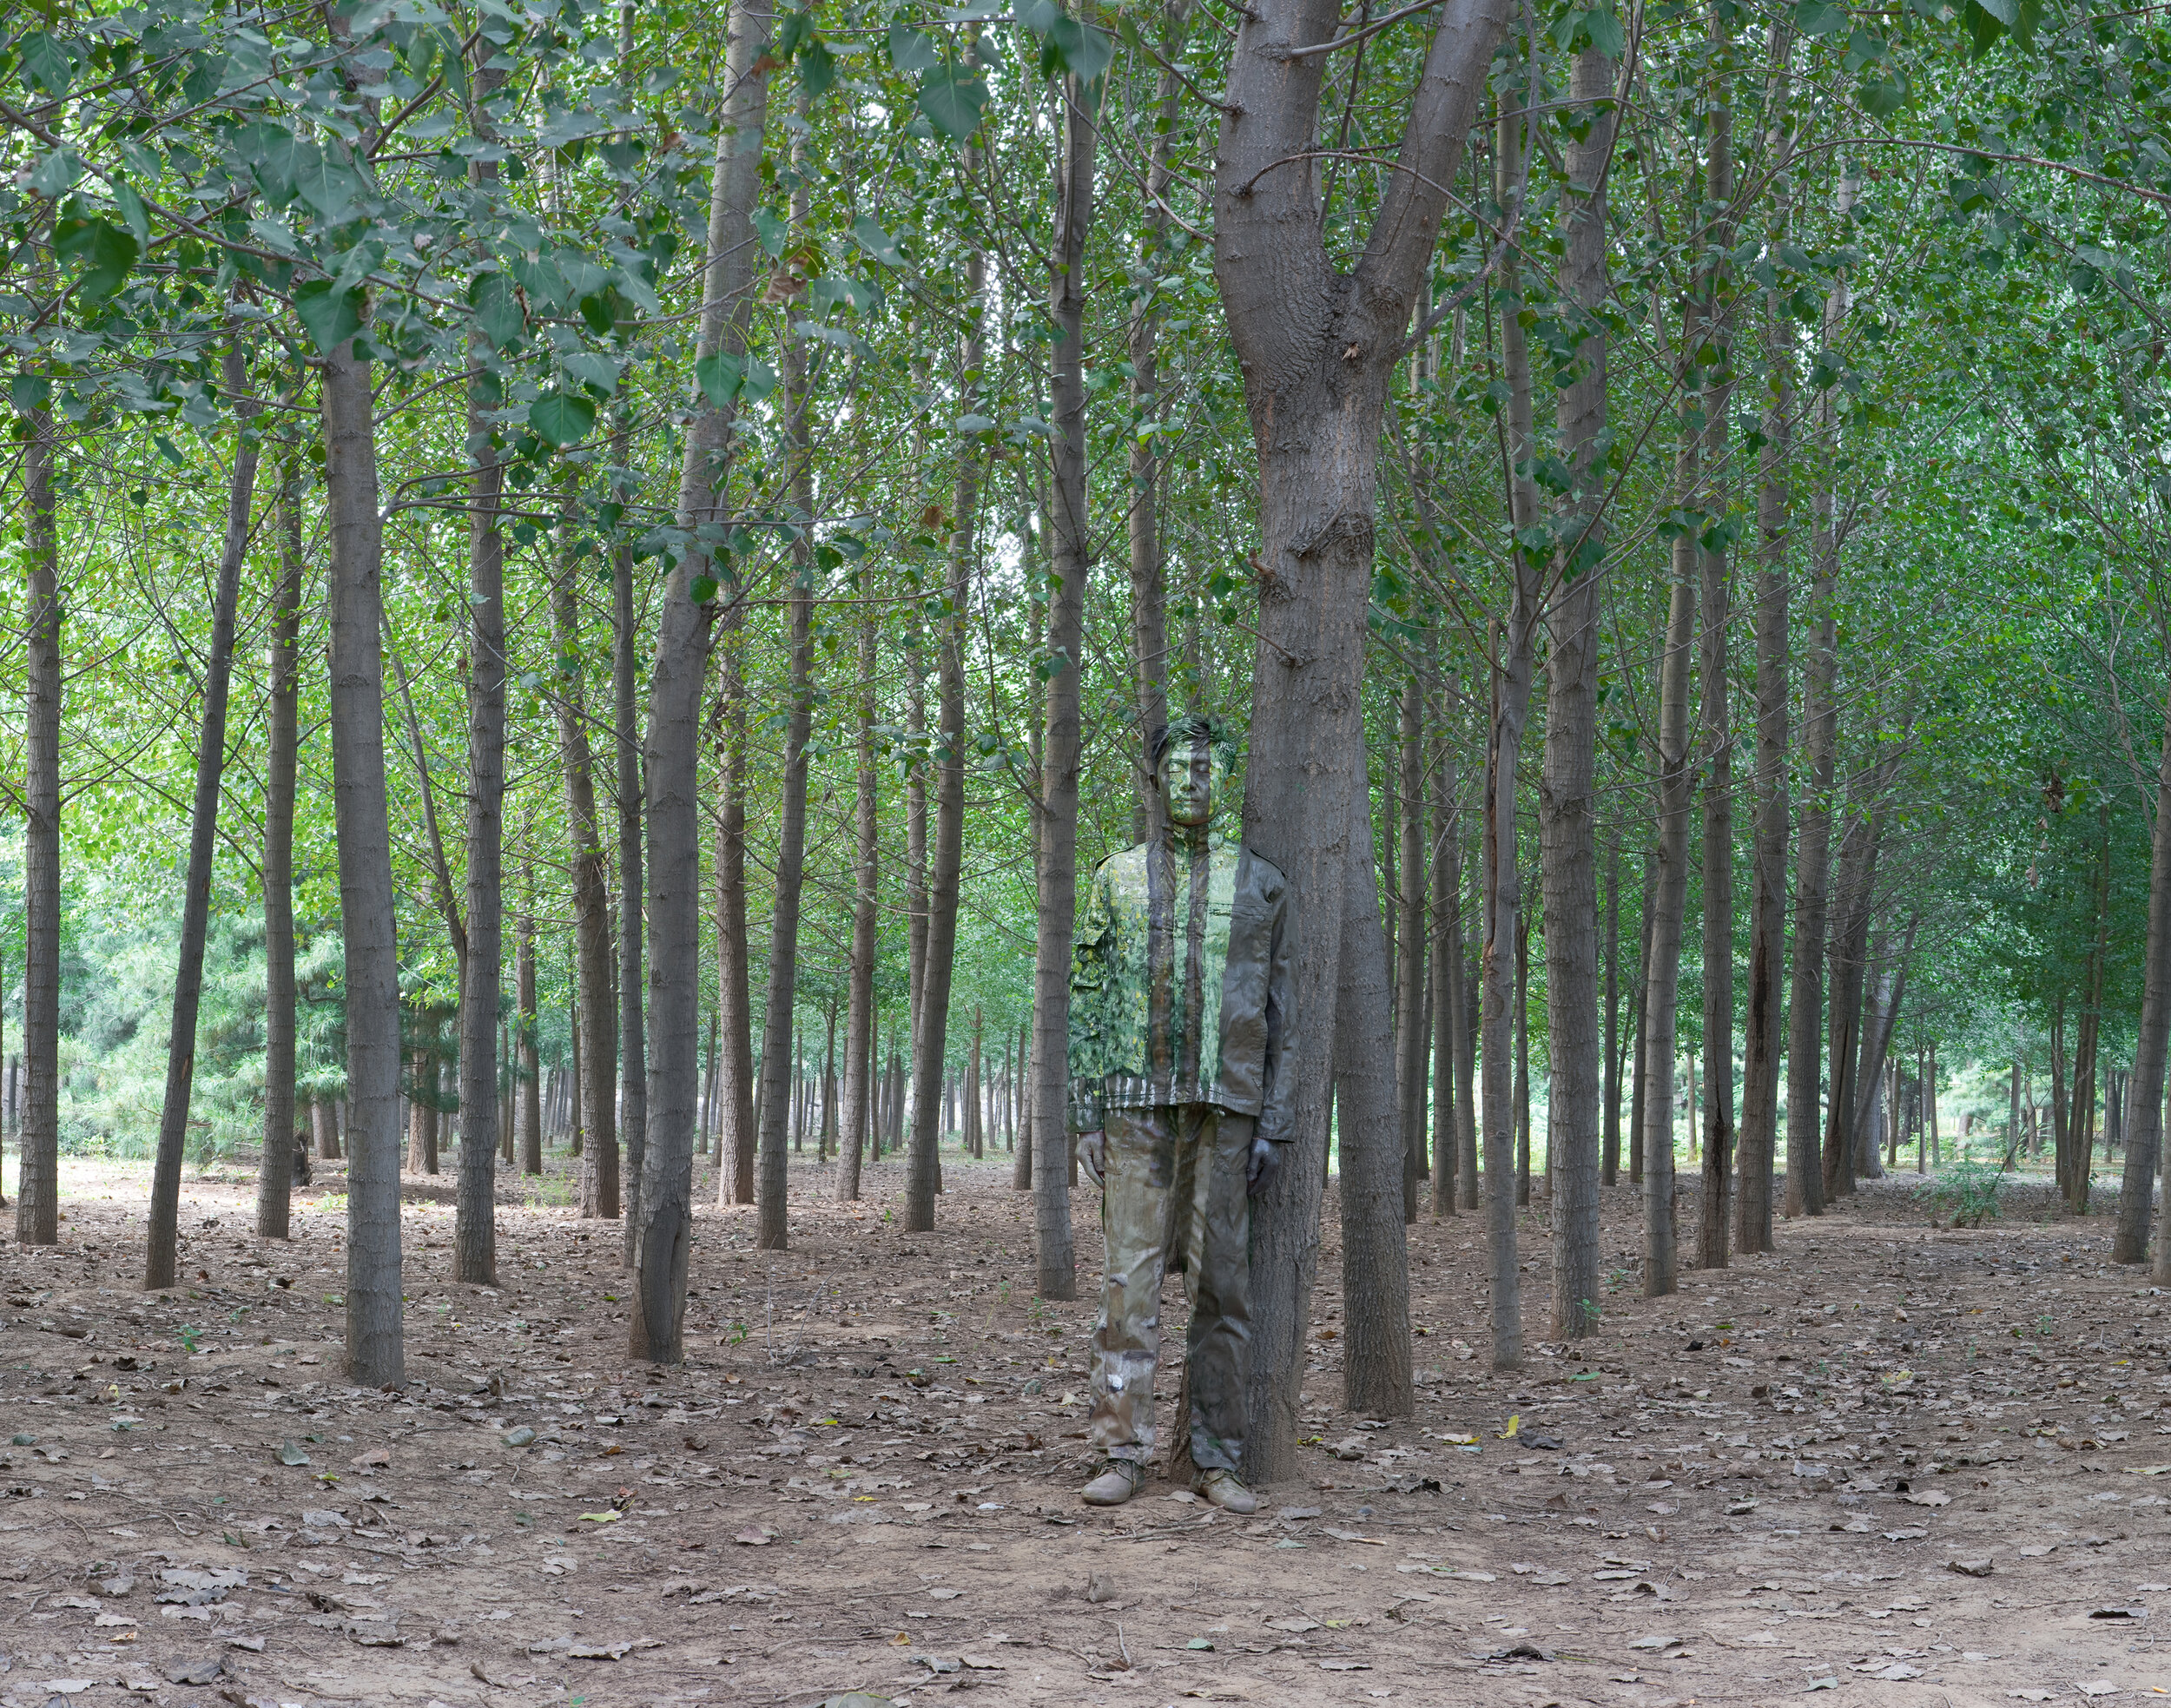 Liu Bolin, In the Woods, Camouflage